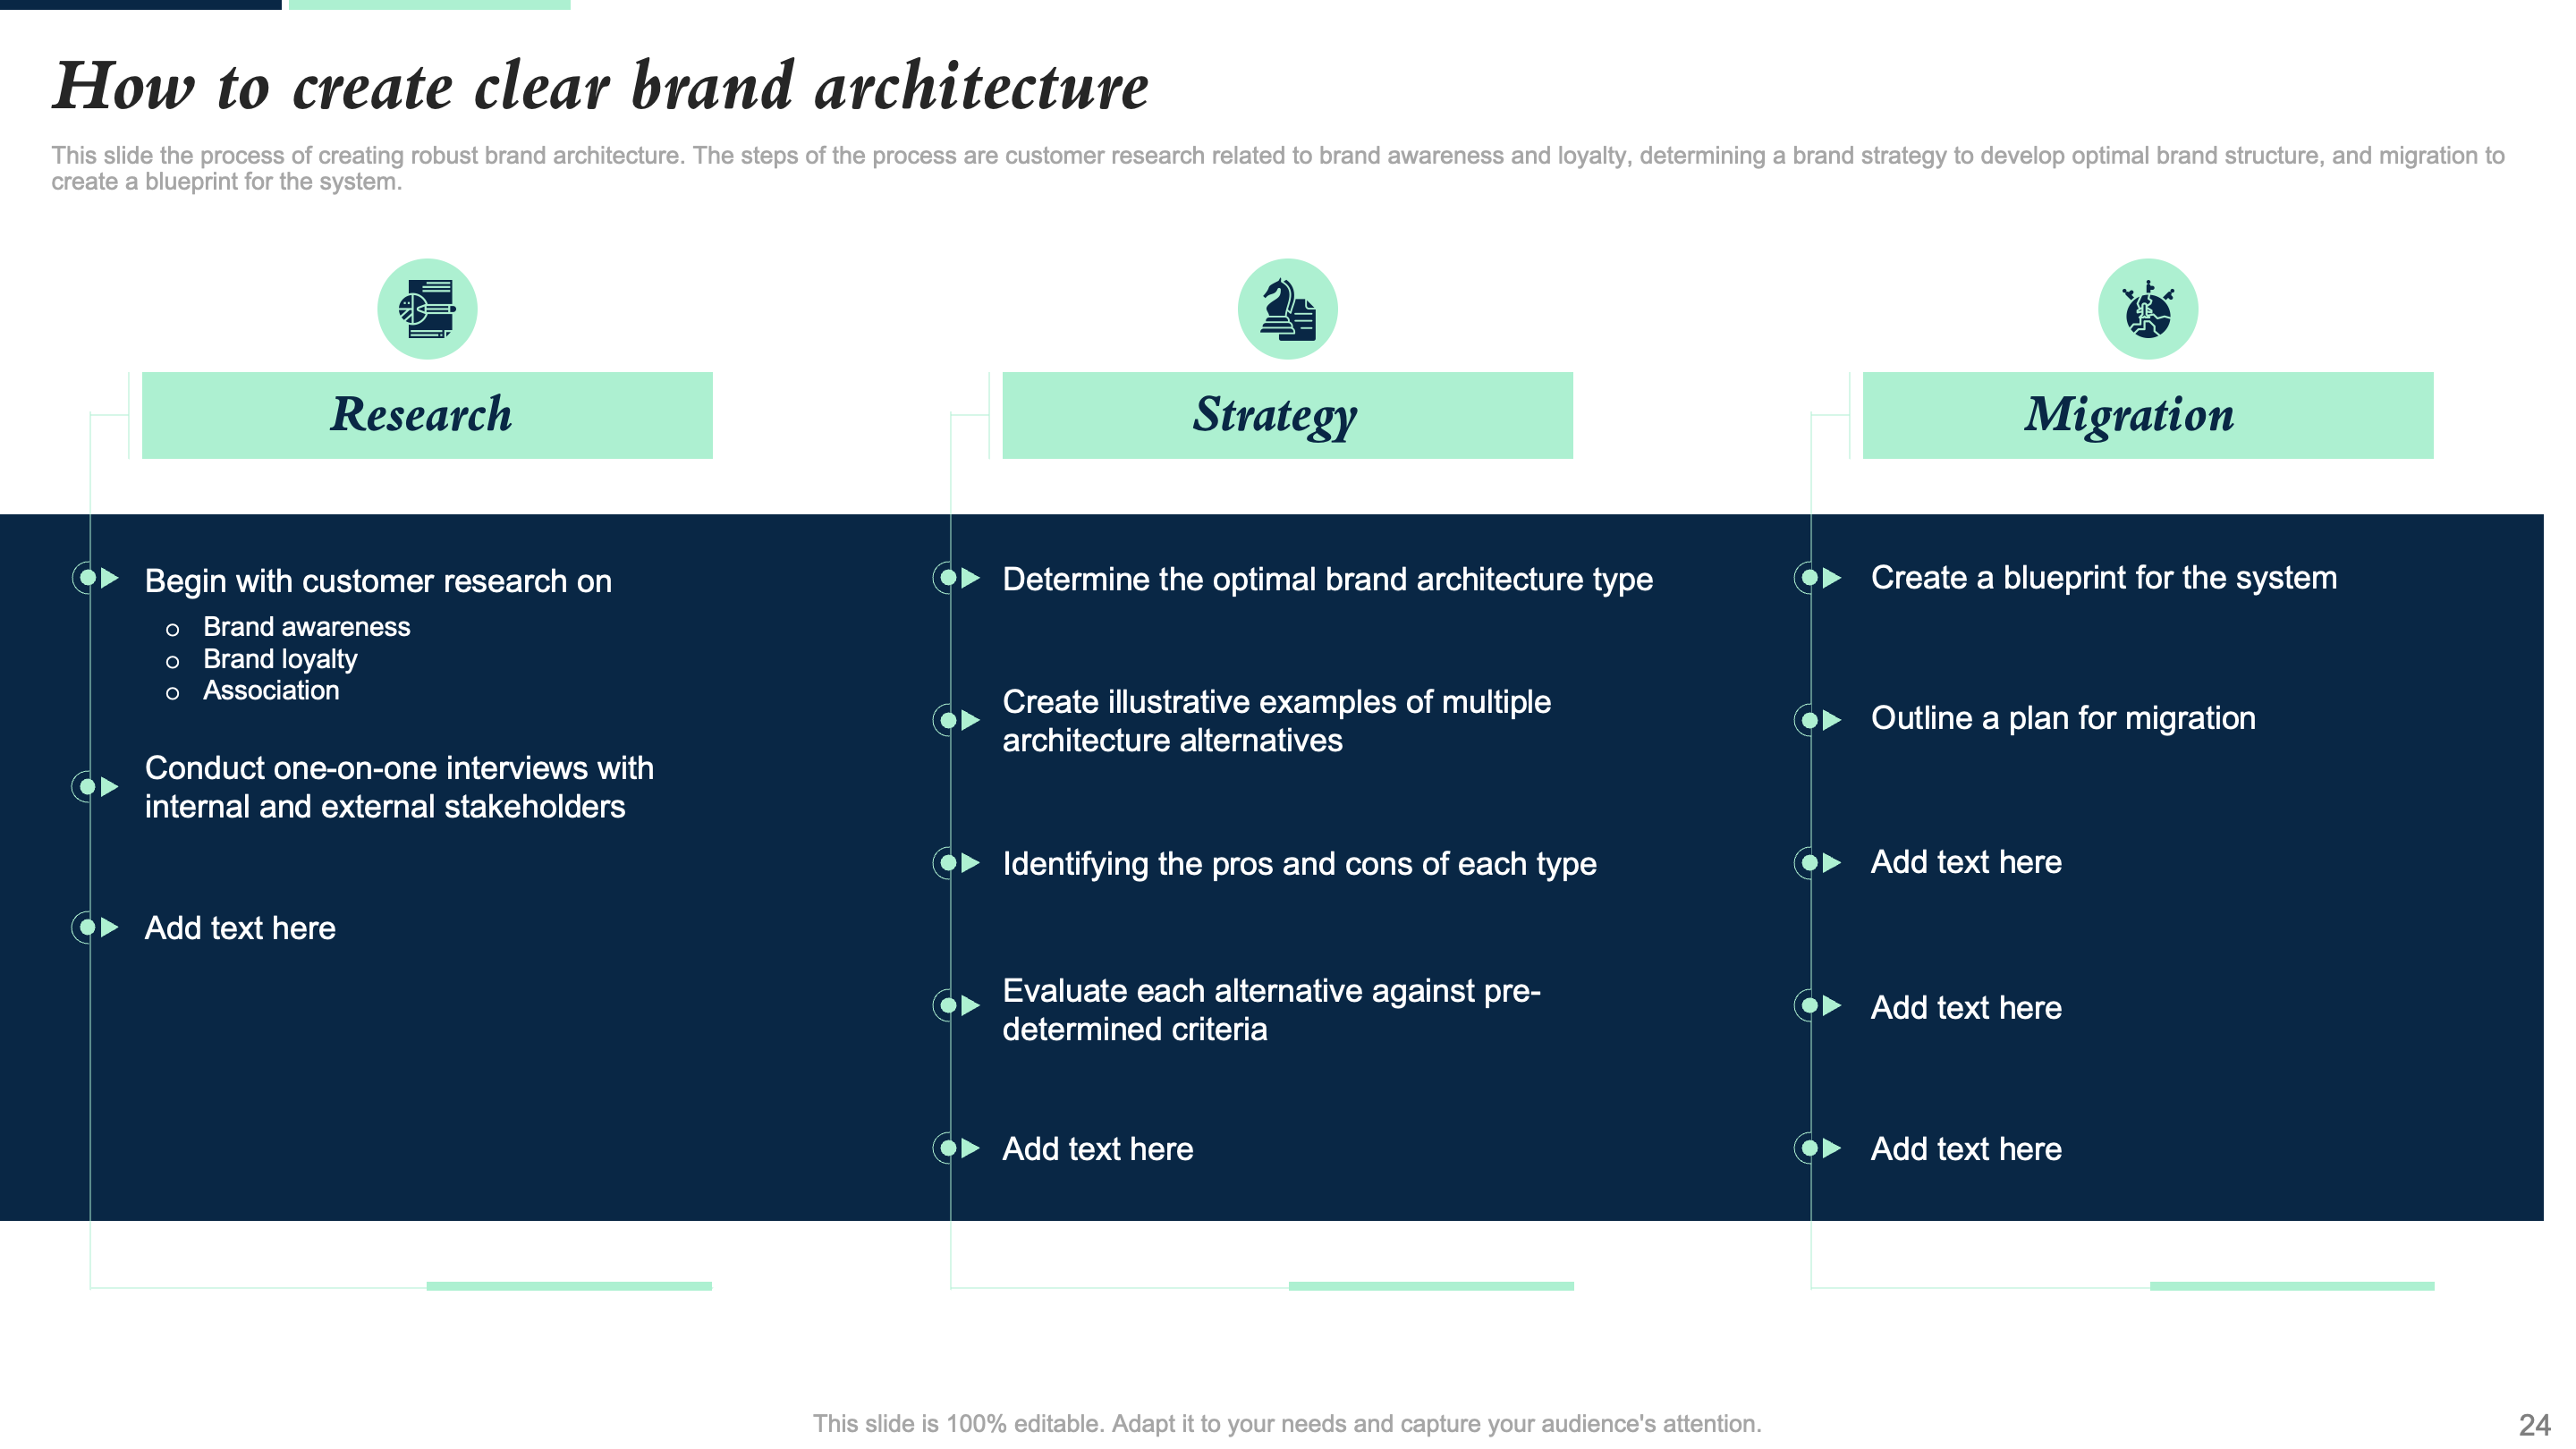 How to Create Clear Brand Architecture?